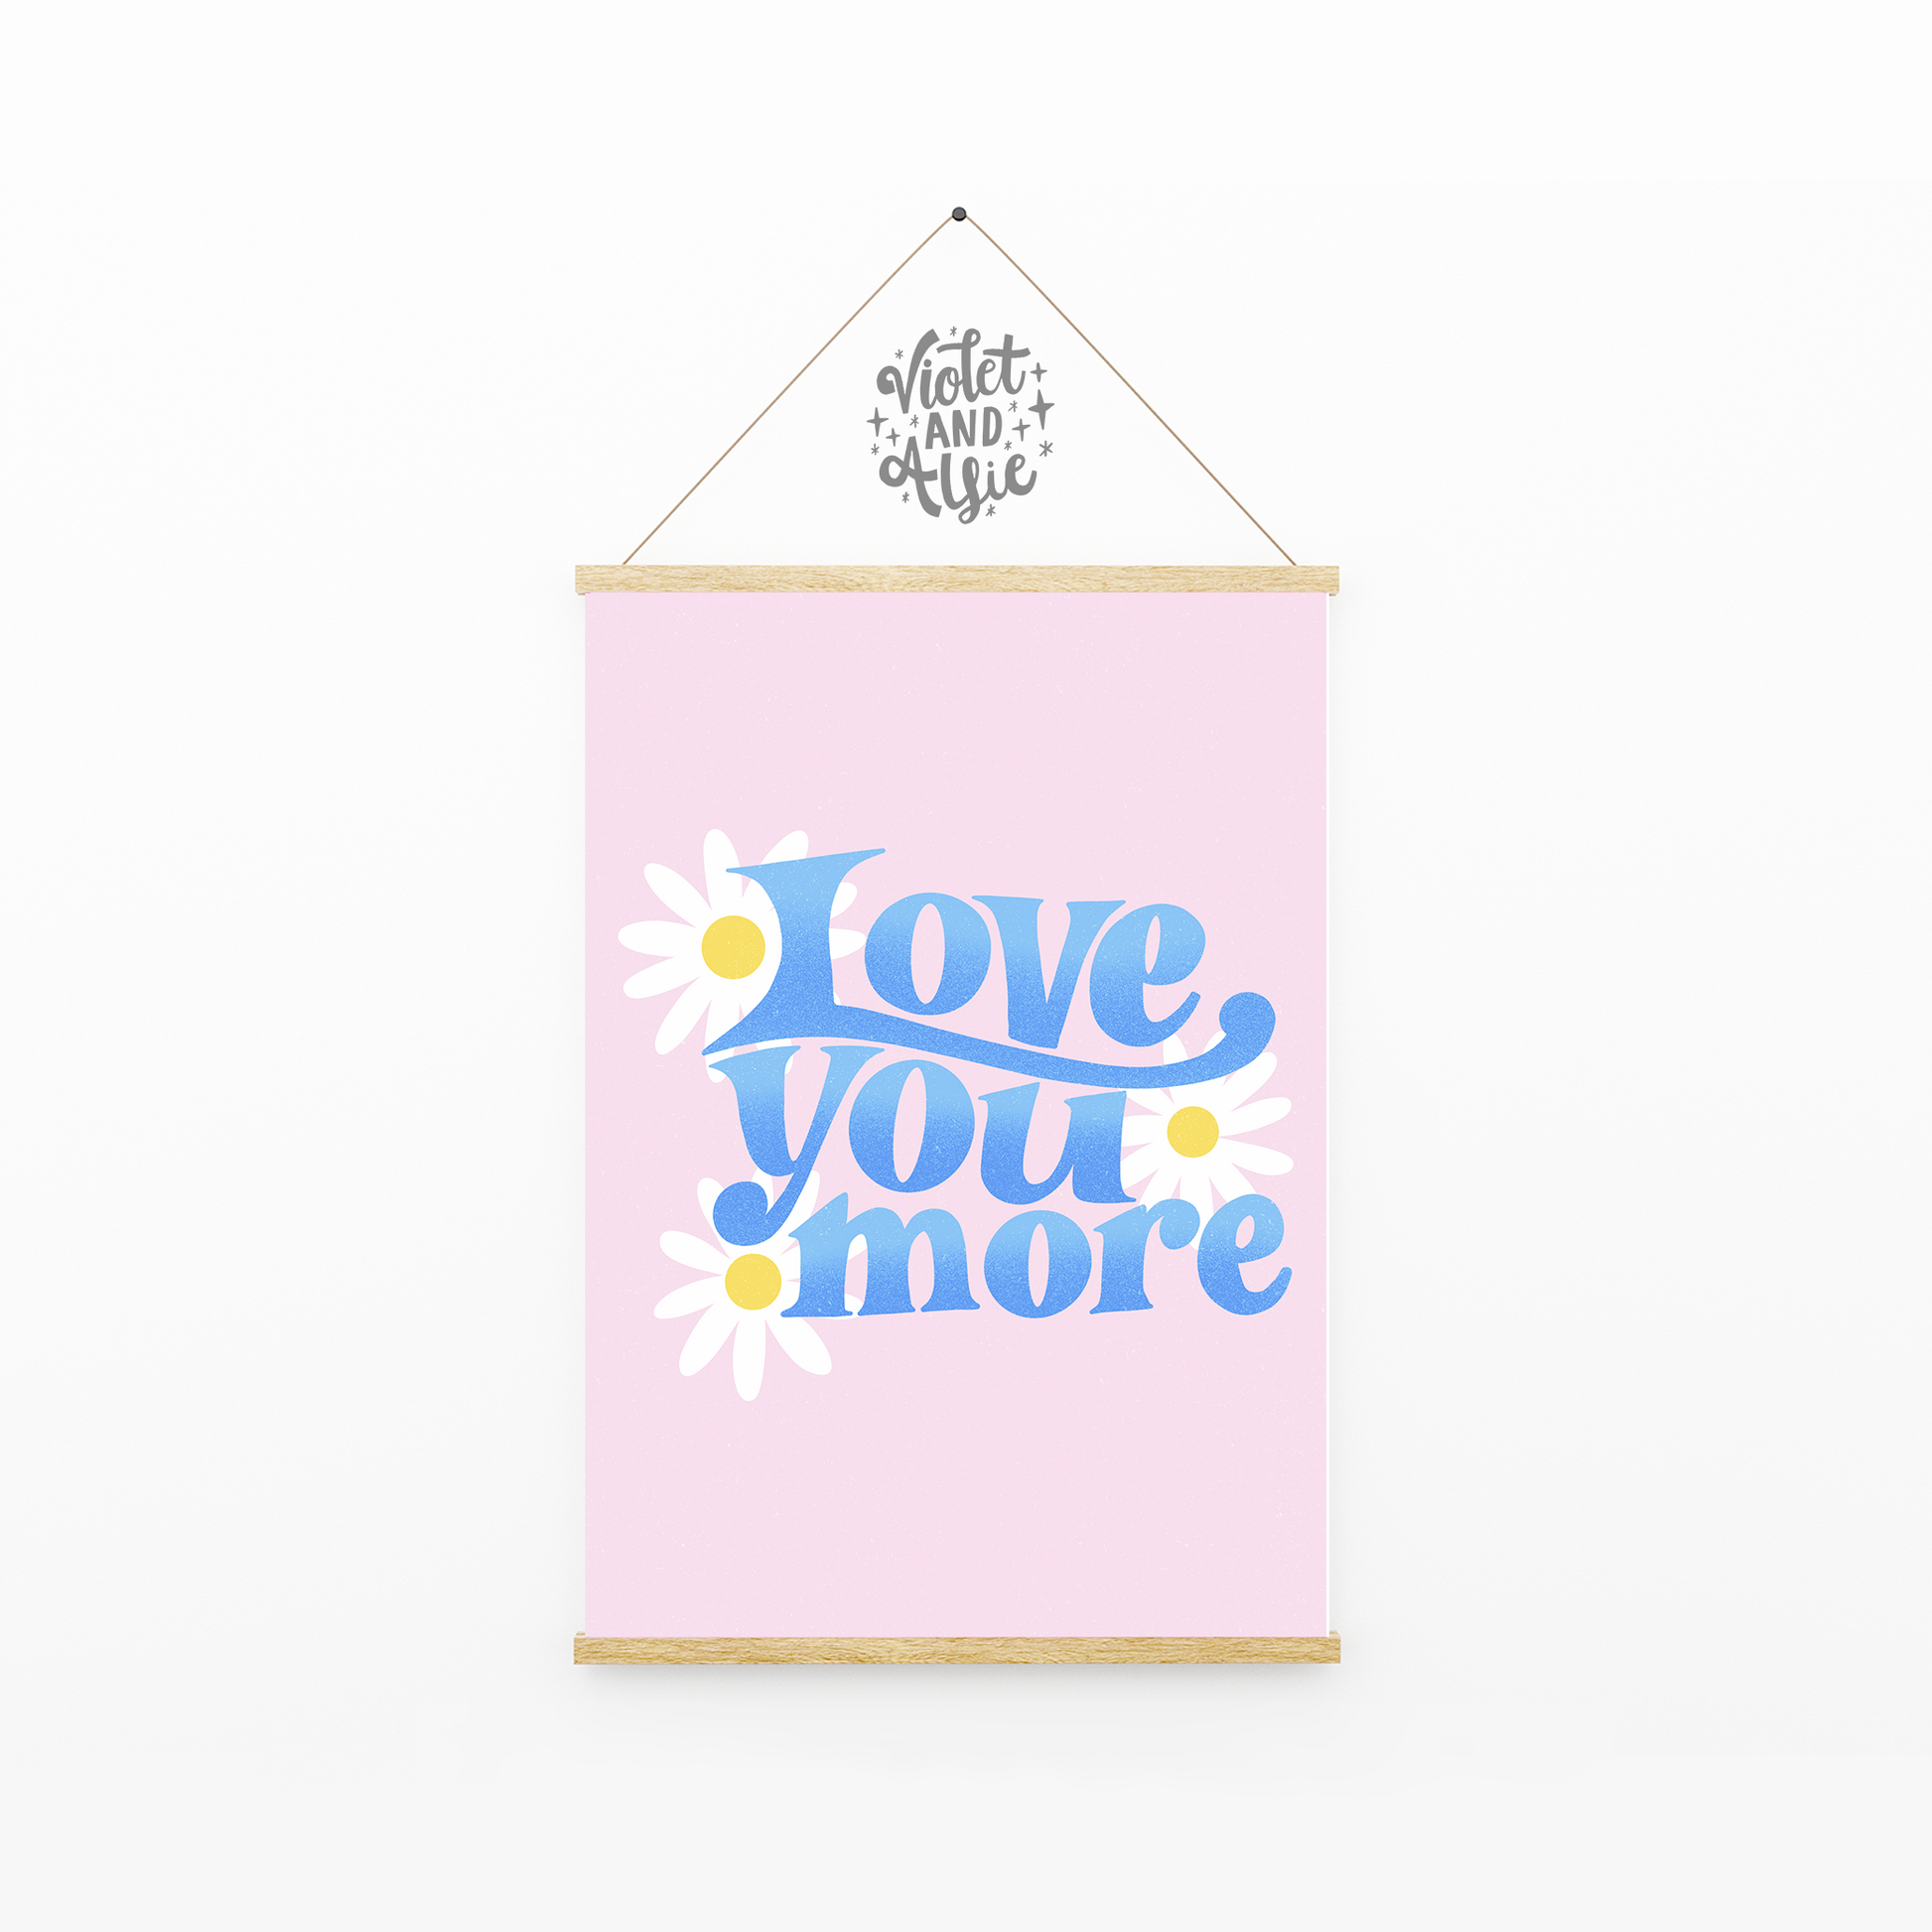 Love You More, vibrant typographic, floral print, nursery or young girl's bedroom decor, Love You More Print, Girl's Room Decor, Retro Typography, Daisy Art, Prints for baby girl nursery, love print, love quotes, children's room decor, young girl's bedroom wall art